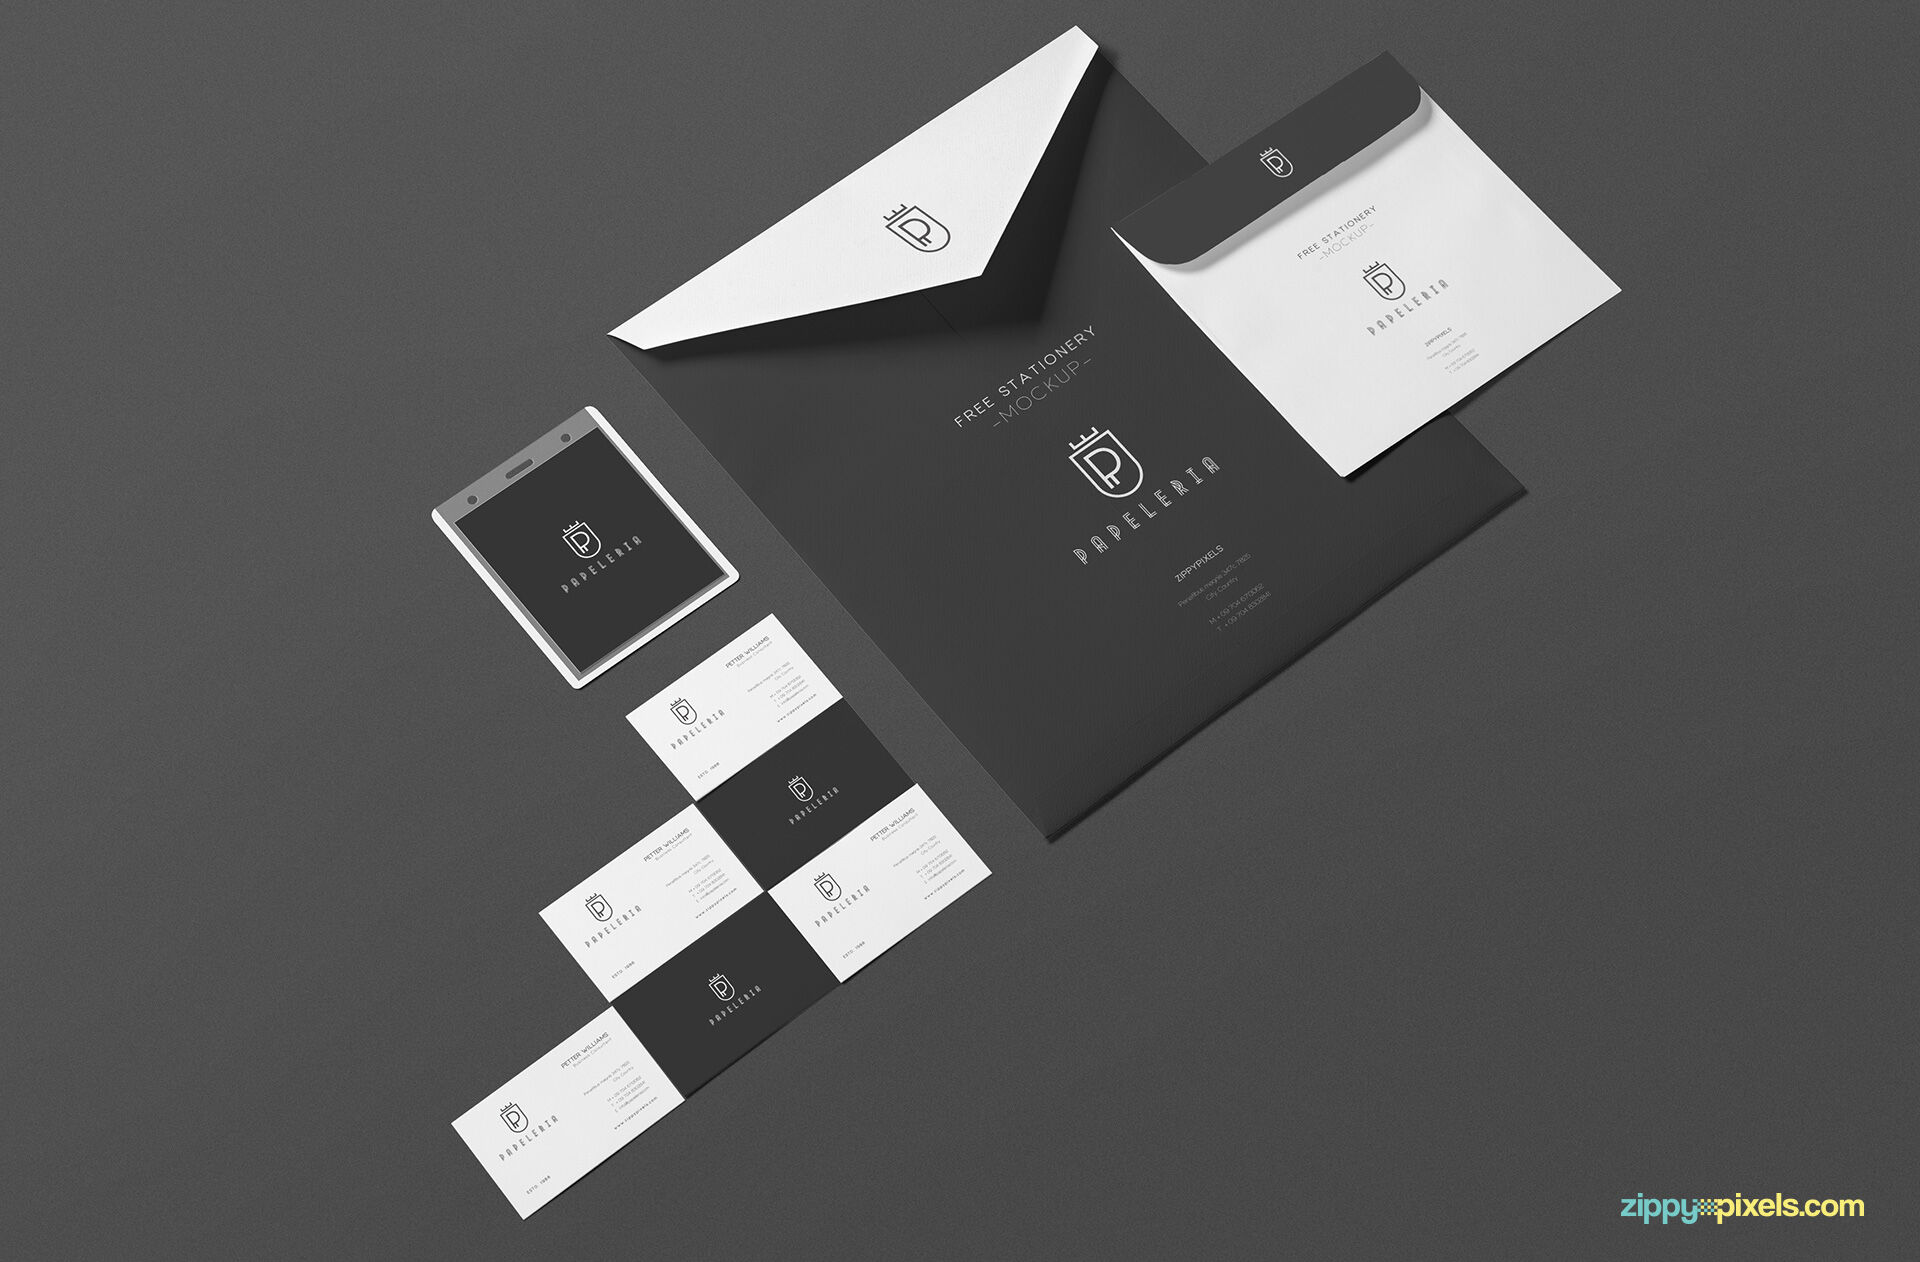 Mockup Featuring 2 Envelopes, 6 Business Cards, and ID Badge FREE PSD